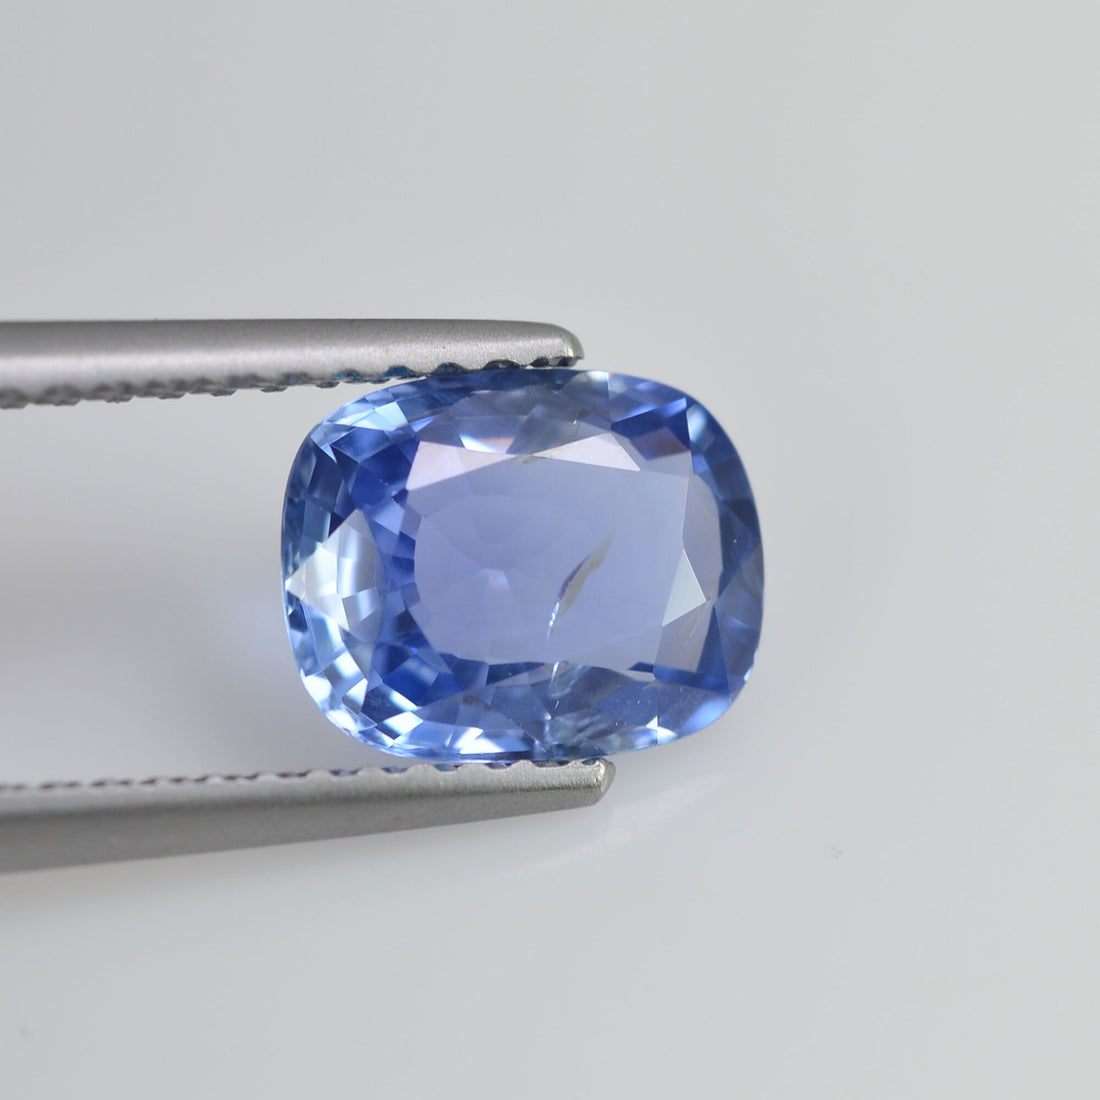 1.68 cts Unheated Natural Blue Sapphire Loose Gemstone Cushion Cut Certified